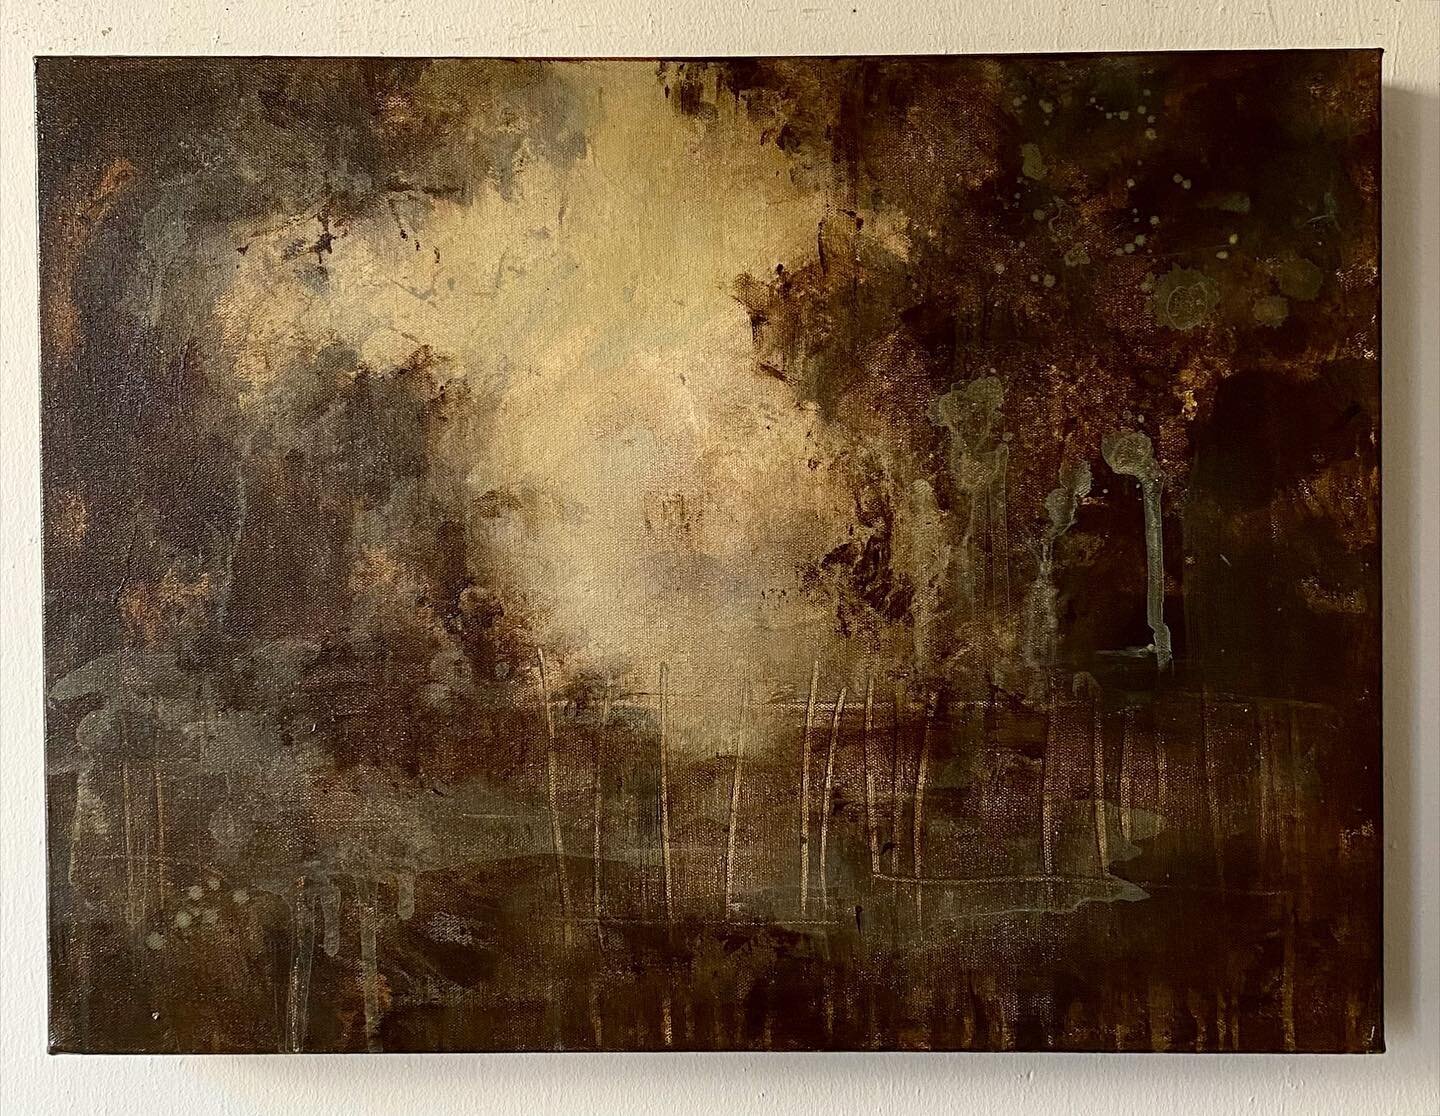 October Half-light, 18x24 on canvas. Thrilled to support our amazing @huntermuseum at the upcoming Spectrum gala on Nov 12. #huntermuseum #spectrum #chattanooga